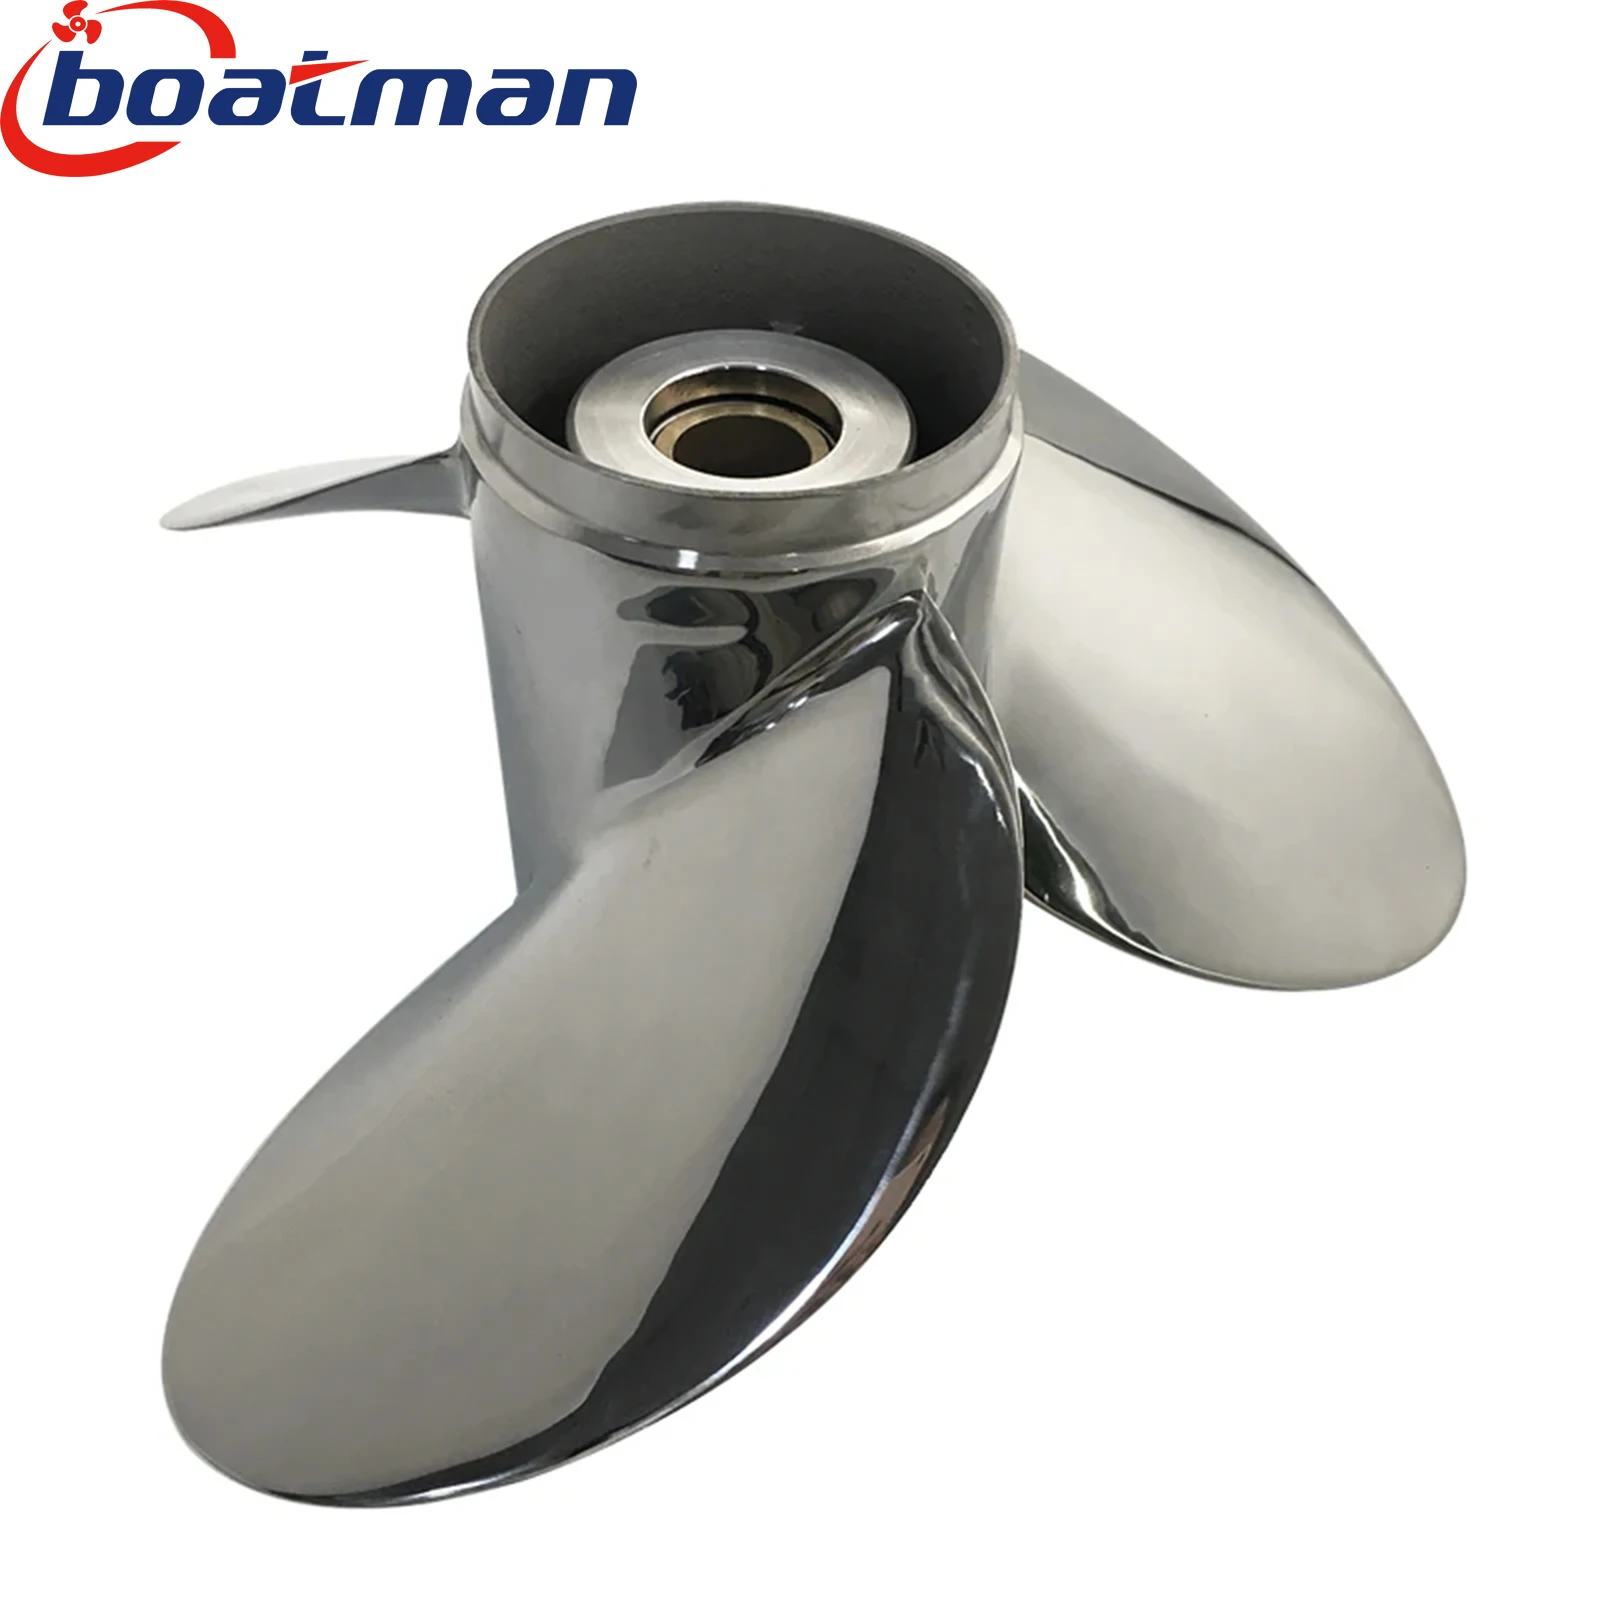 Boat Outboard Propeller 13x19 For Yamaha Motor 4 Stroke 50-130HP Stainless Steel 15 Tooth Spline Engine Part  688-45970-03-98